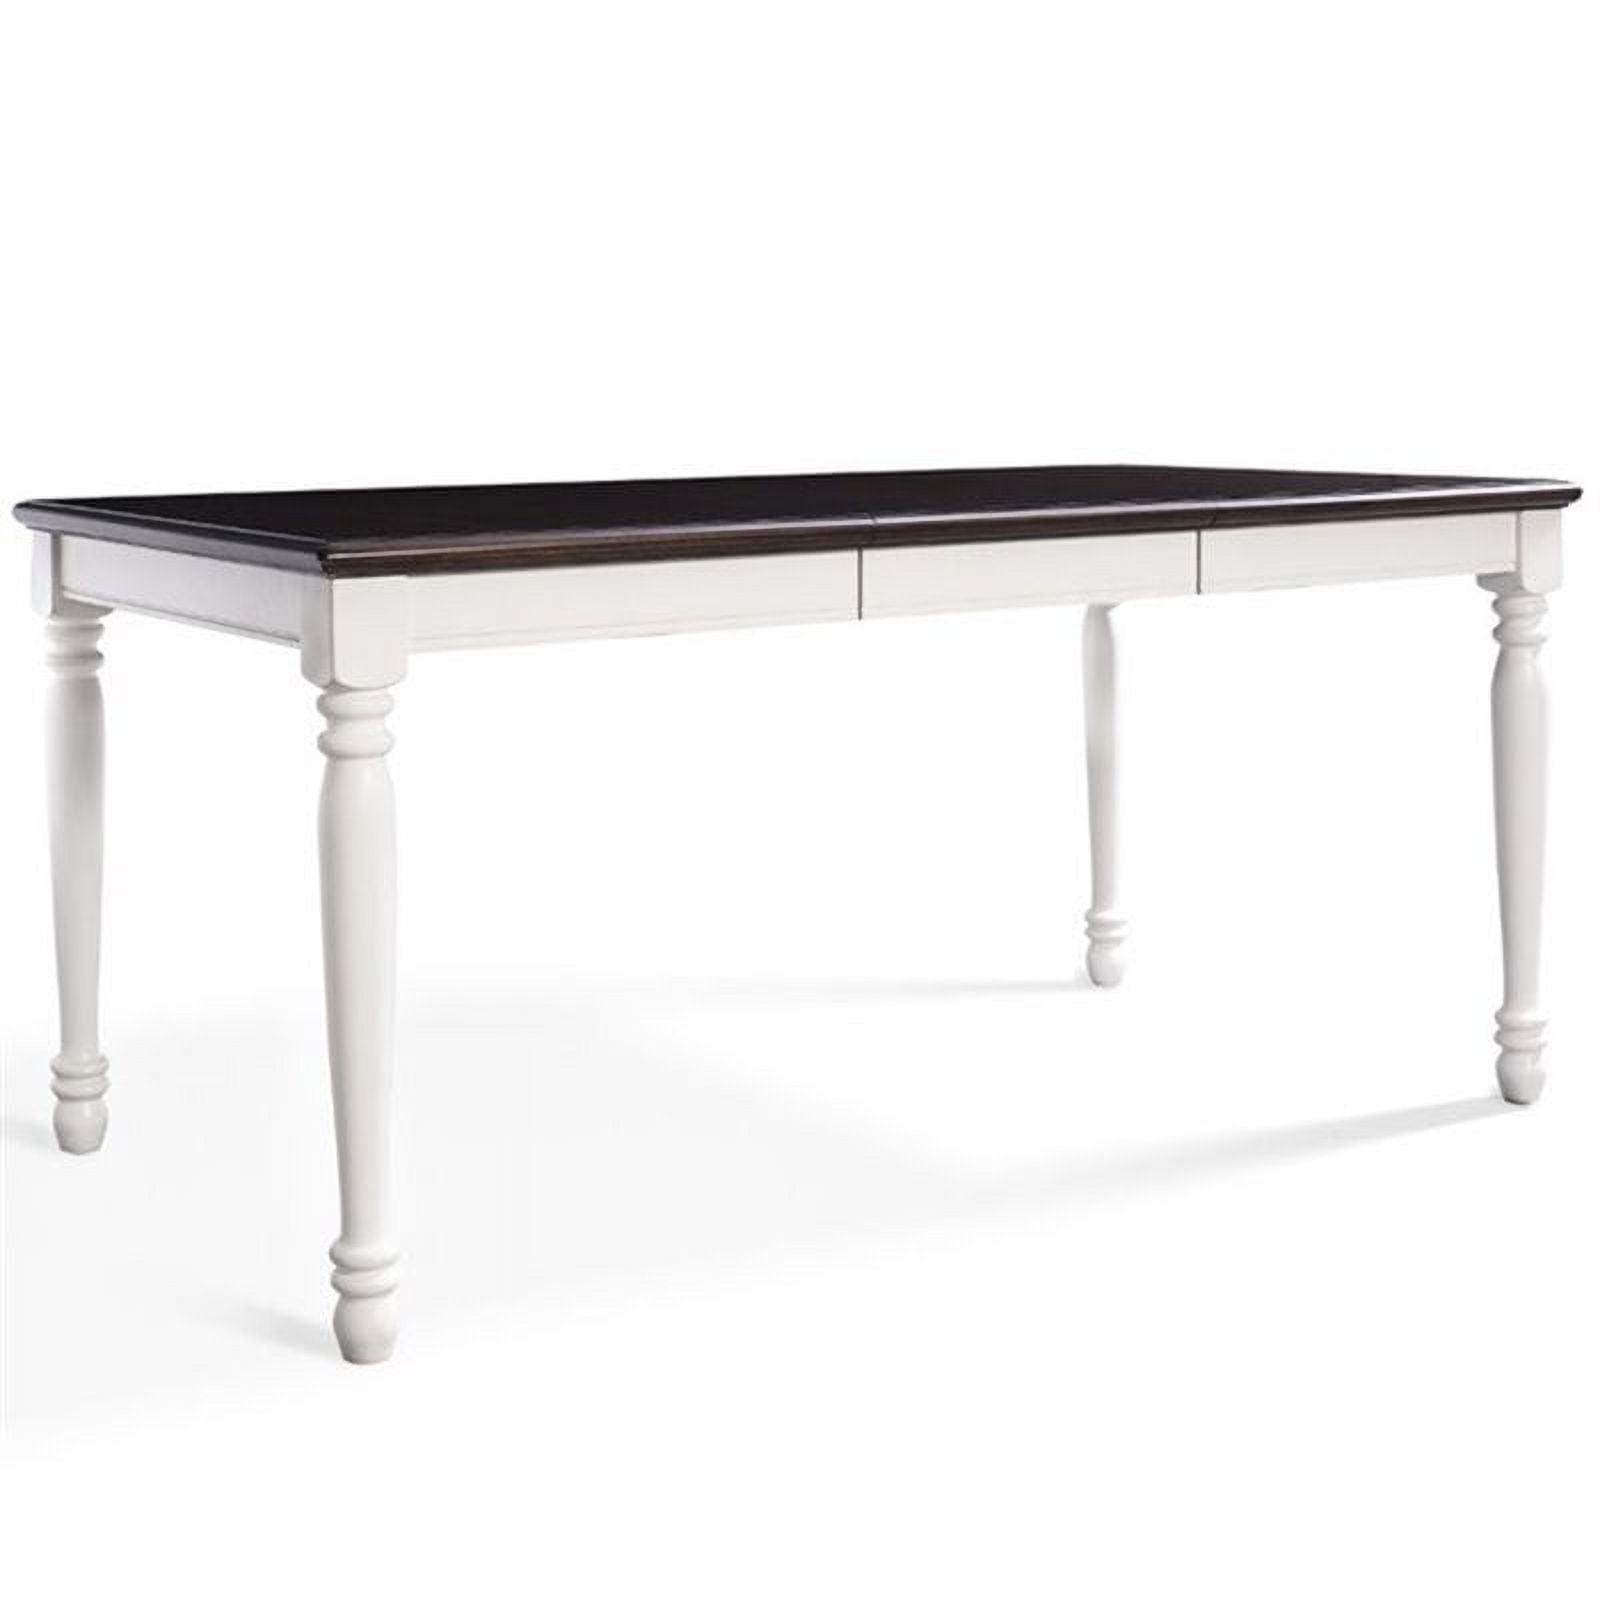 Shelby Extendable Solid Hardwood Dining Table in Antique White